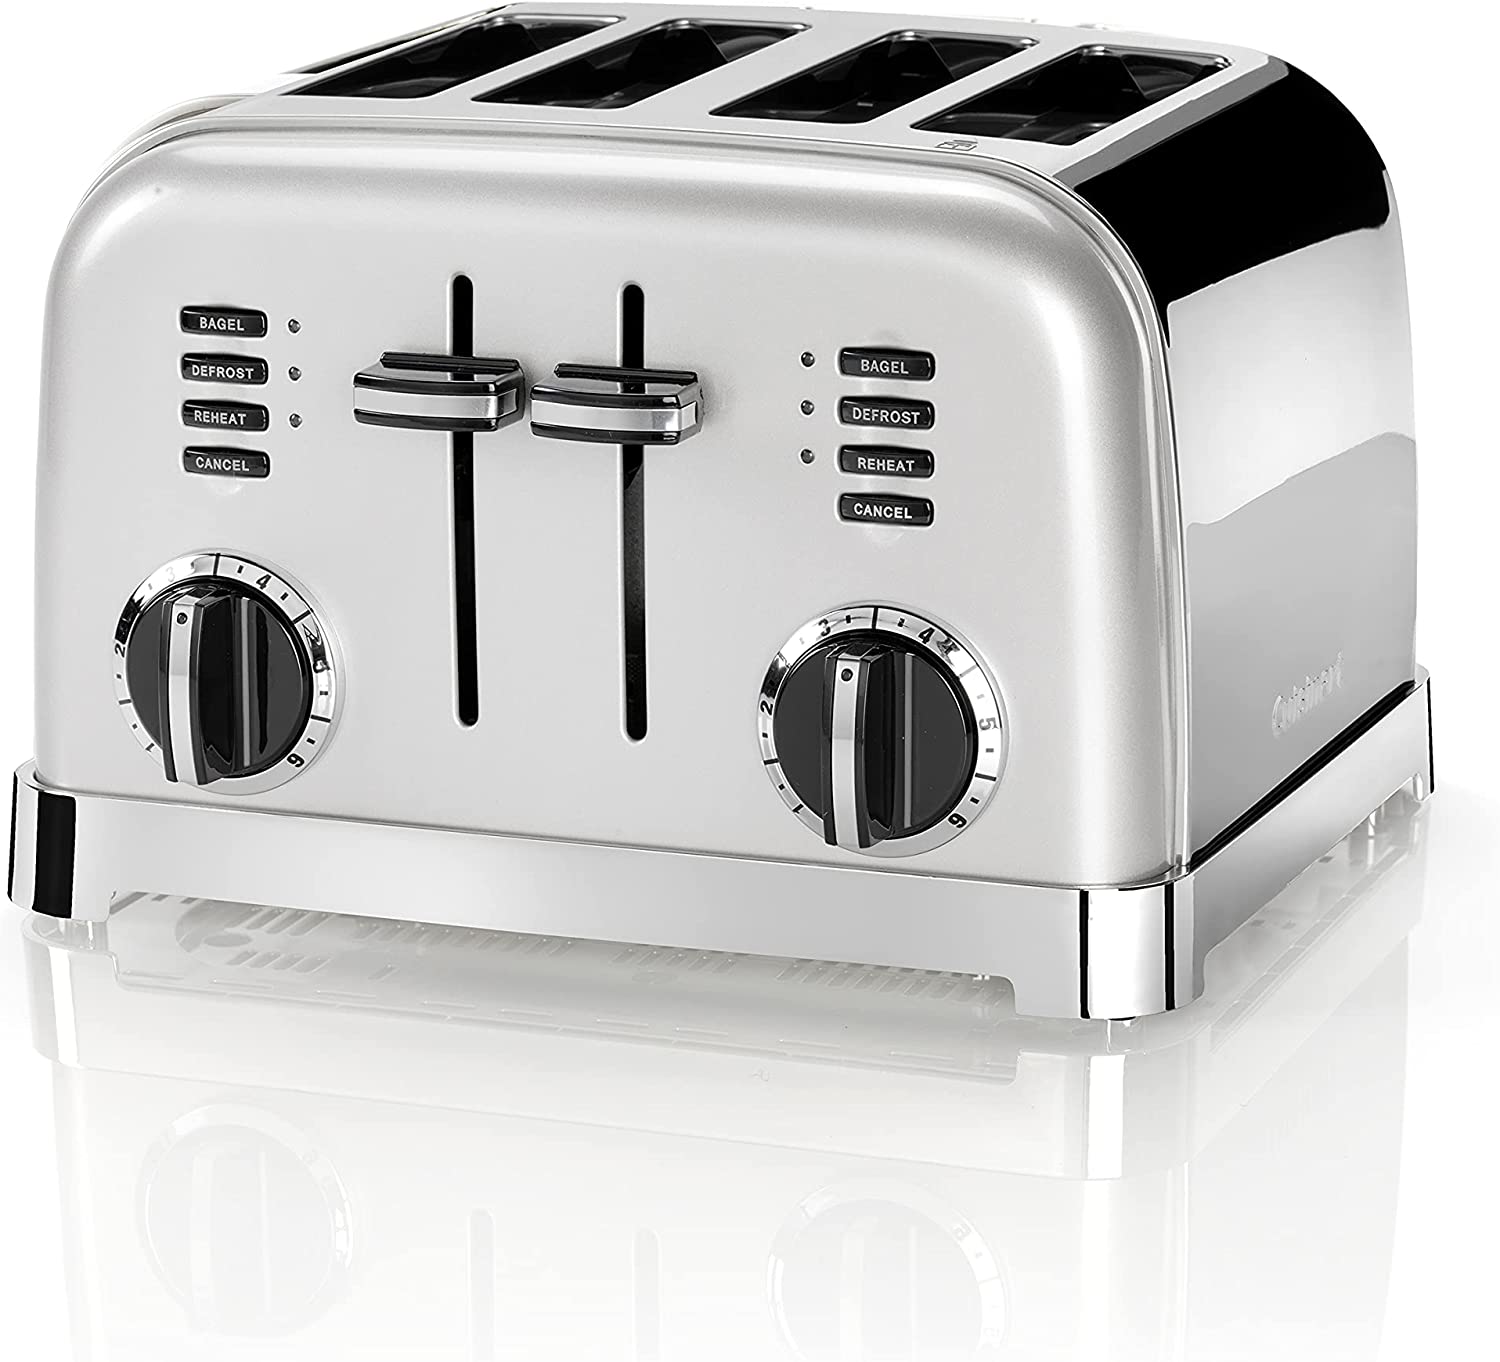 Cuisinart CPT180SE Style Collection 4-Shield Toaster, Stainless Steel, Silver, 283